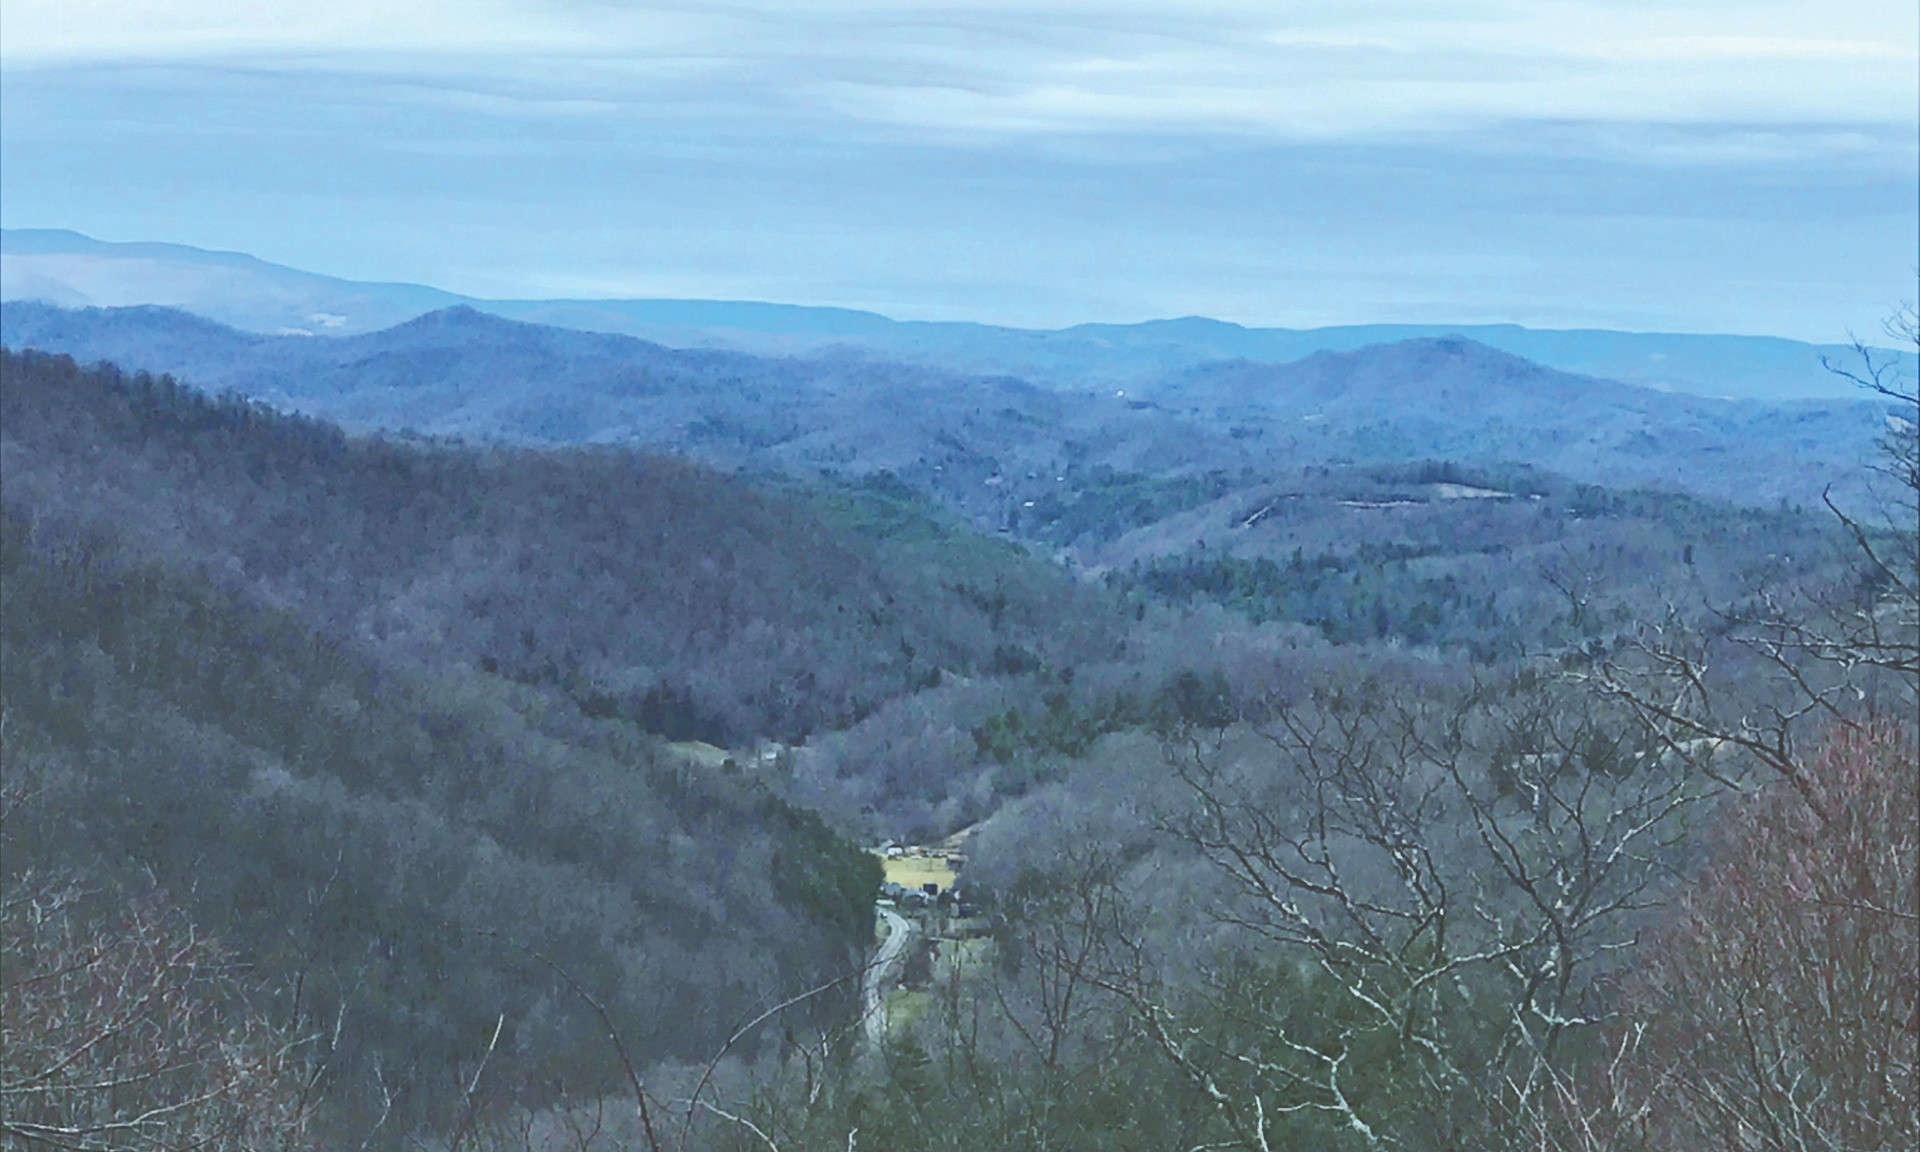 Lot 39 in Granite Ridge, a lovely gated community in the Jefferson area of Ashe County, offers the ideal homesite for your NC mountain retreat or forever home.